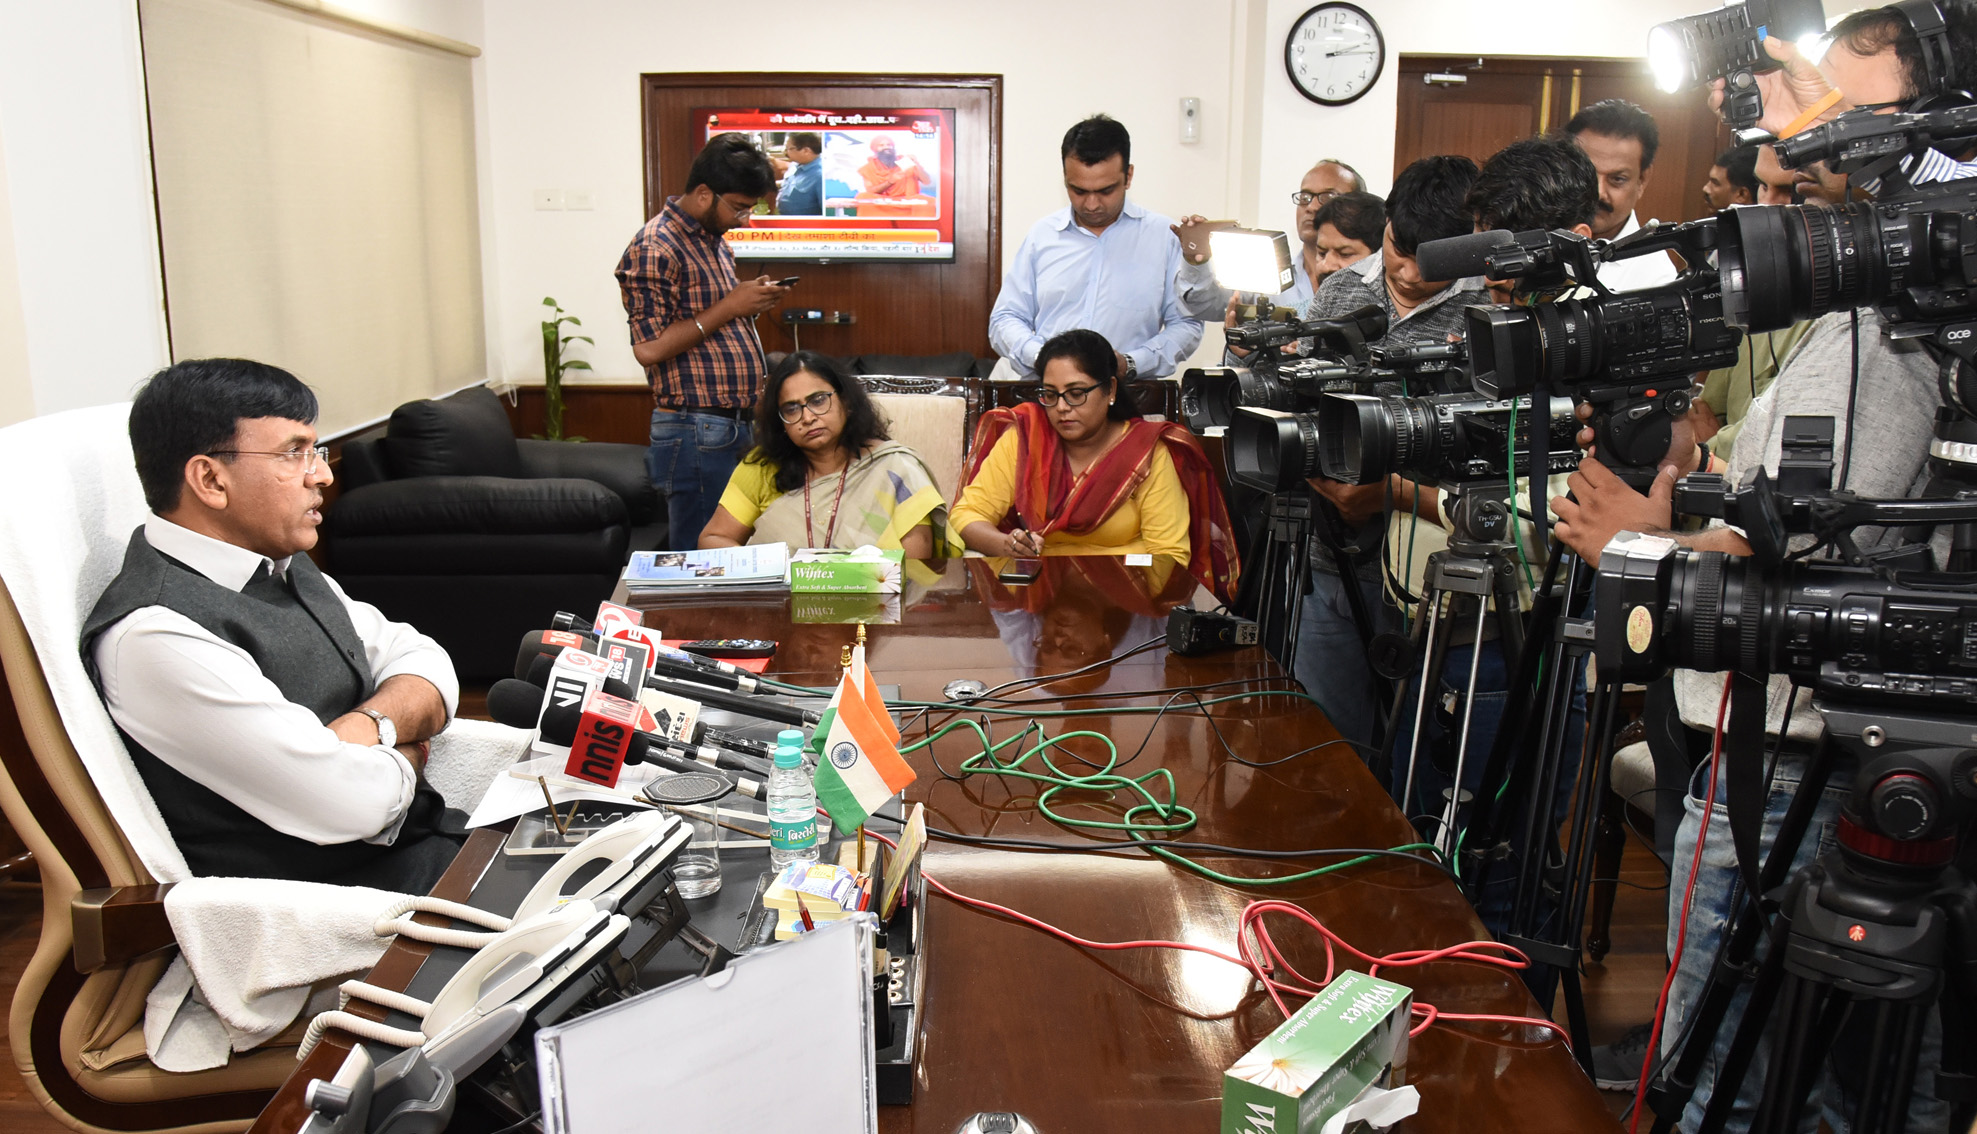 File:Mansukh L. Mandaviya holding a press conference to announce the Inter State Connectivity (ISC) Road Works programme for the year 2018-19 for Gujrat, in New Delhi (1).JPG - Wikimedia Commons